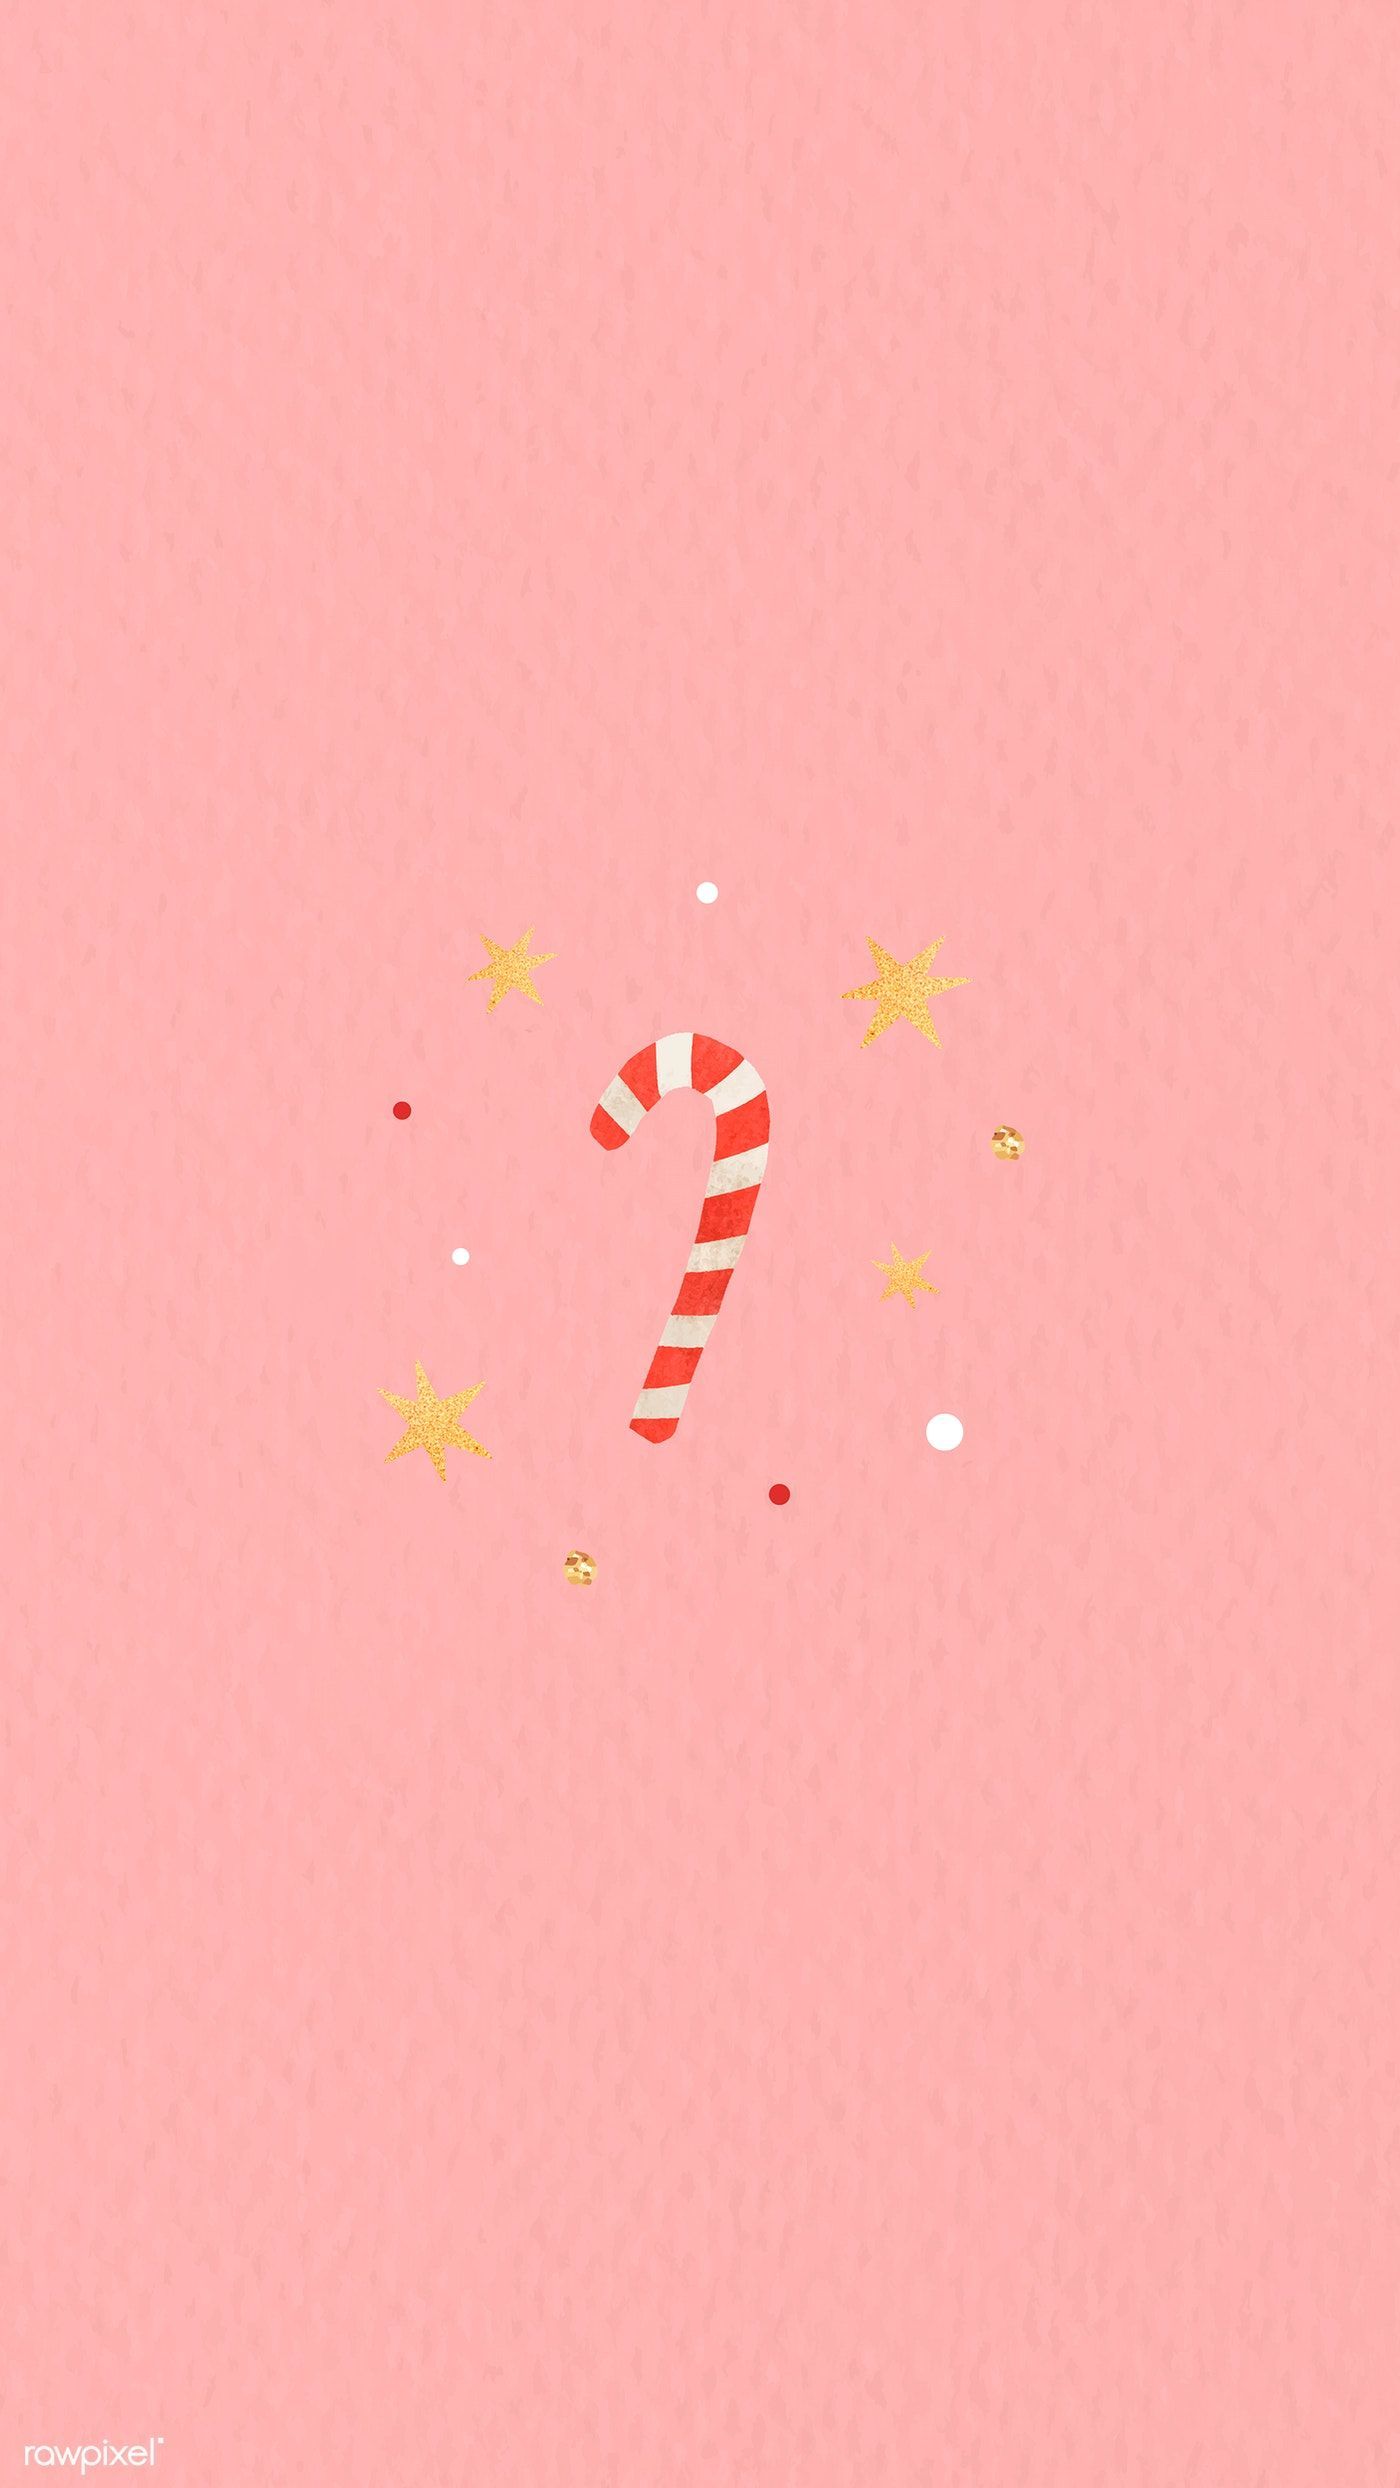 Cute Candy Canes Wallpapers - Wallpaper Cave